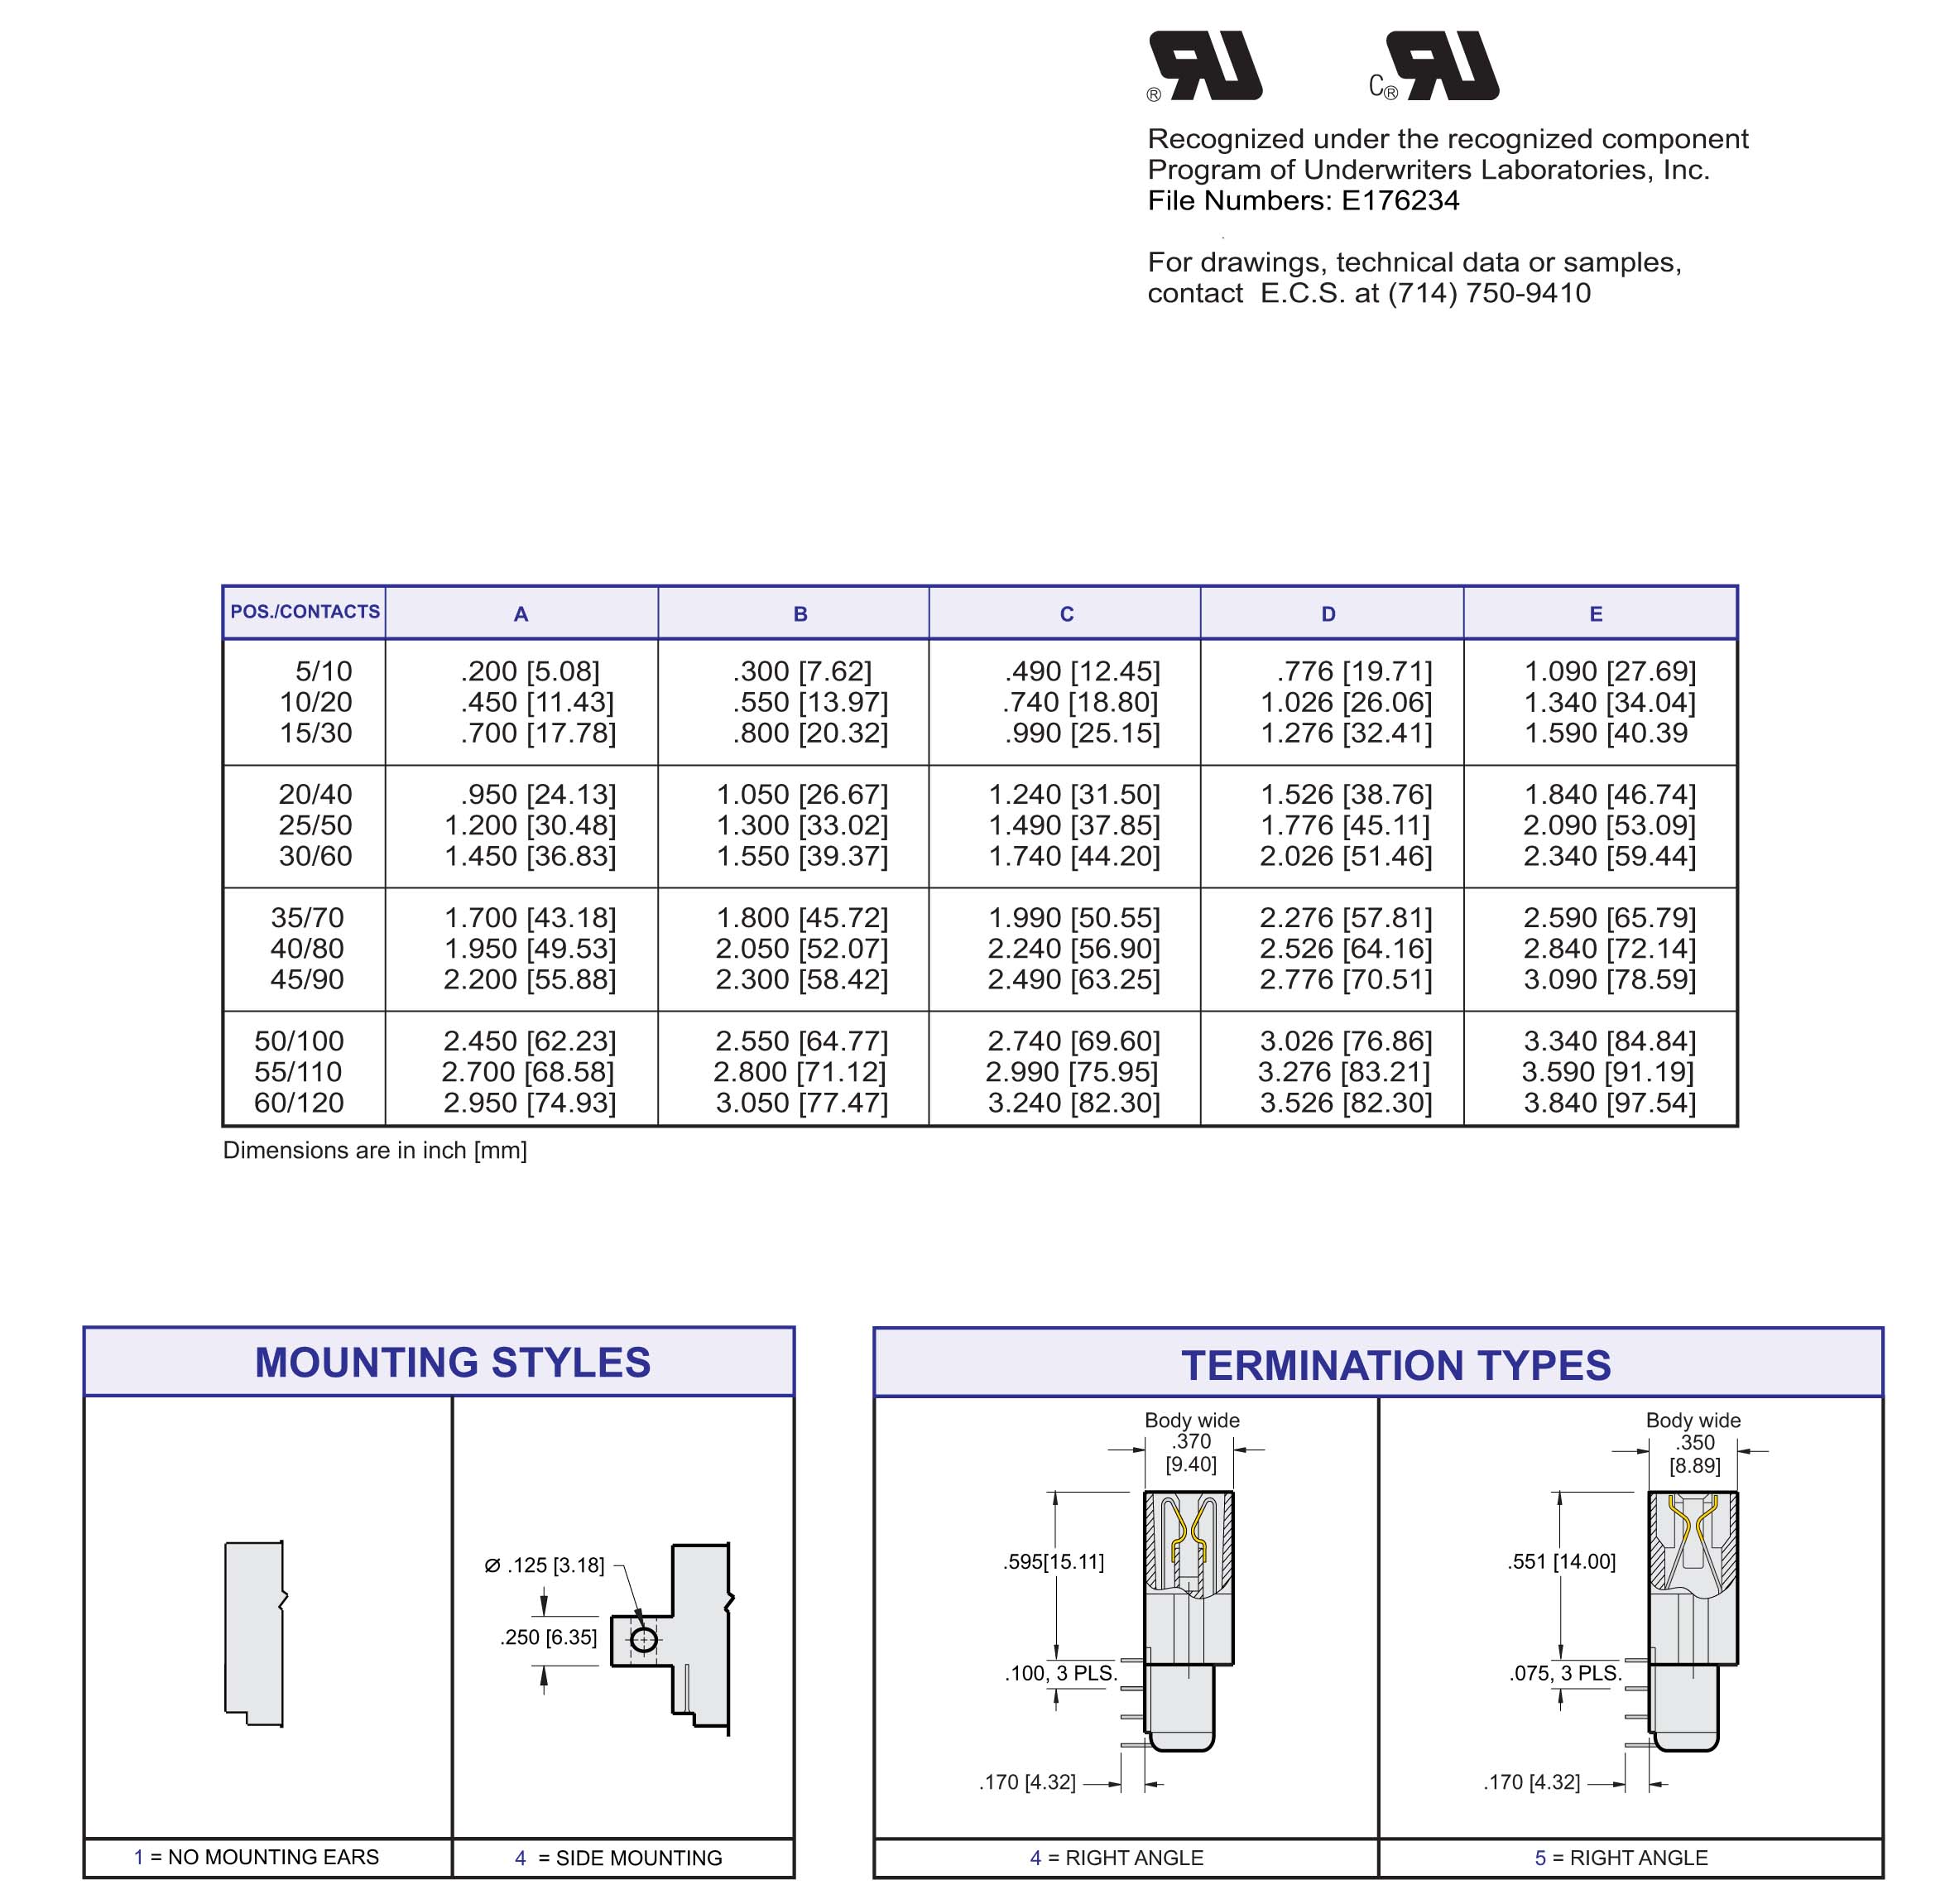 ECS 1800 Series Card Edge Connectors .050[1.27] Contact Centers, Right Angle Termination